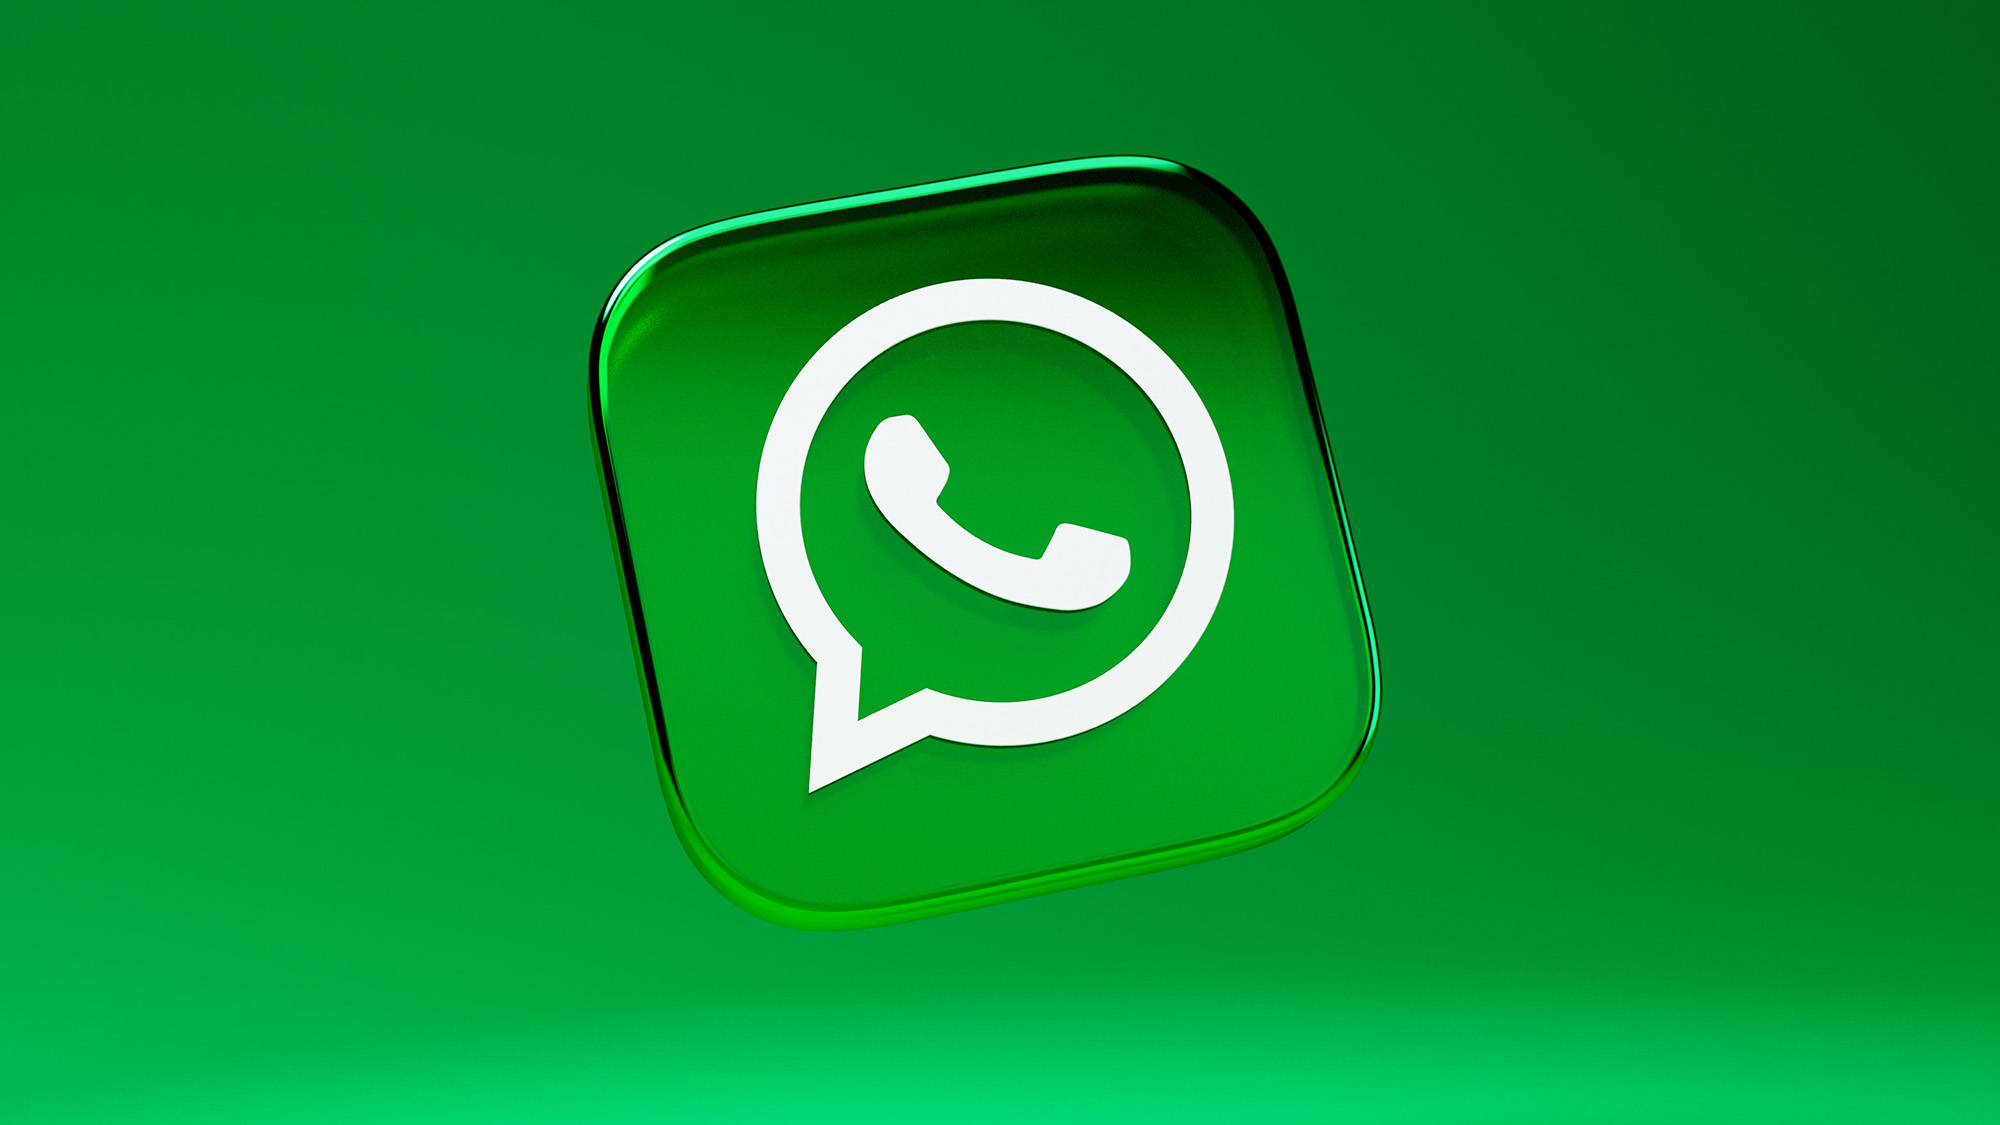 Render of a WhatsApp logo seemingly made out of plastic bouncing in front of a green backdrop.